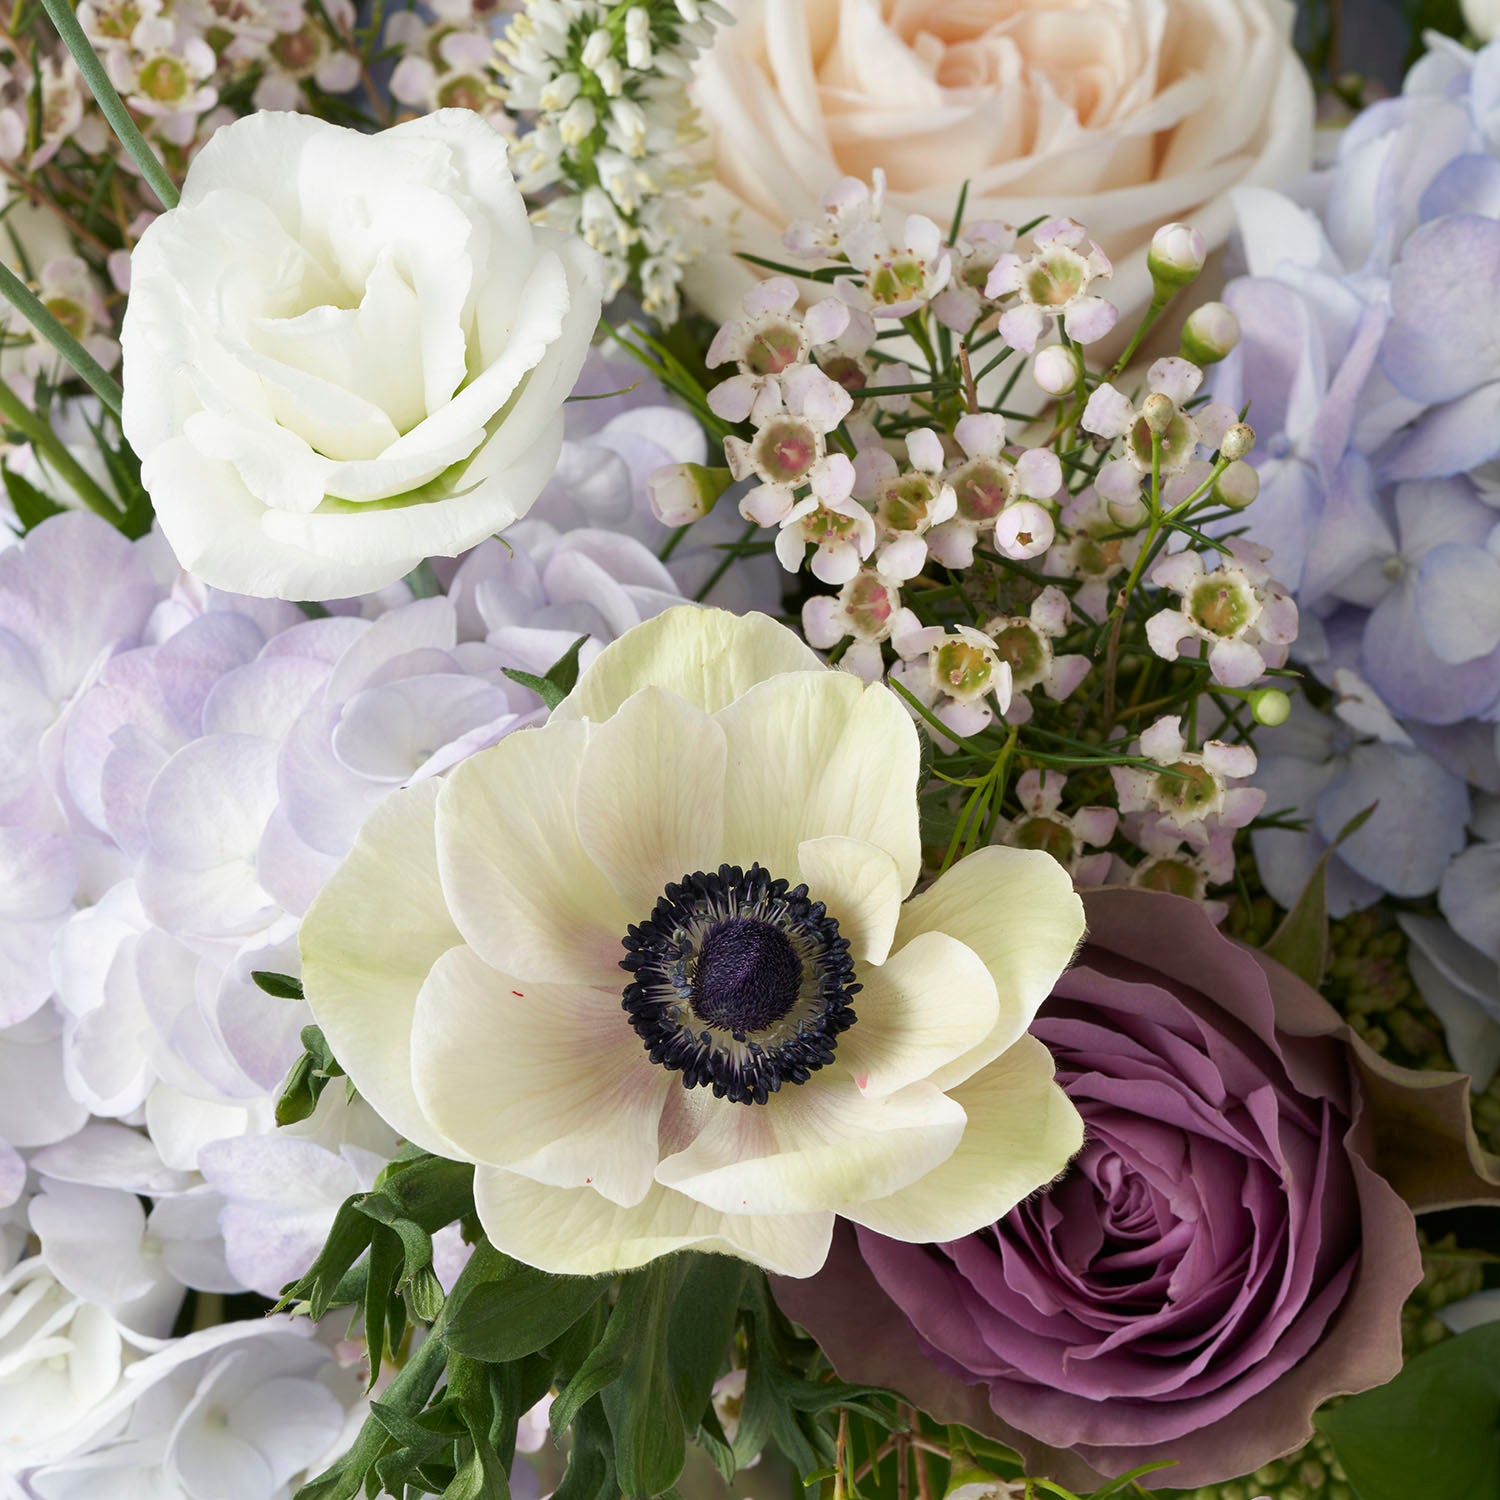 Closeup of white anemonie, pale blue hydrangea, and dusty lavender rose.